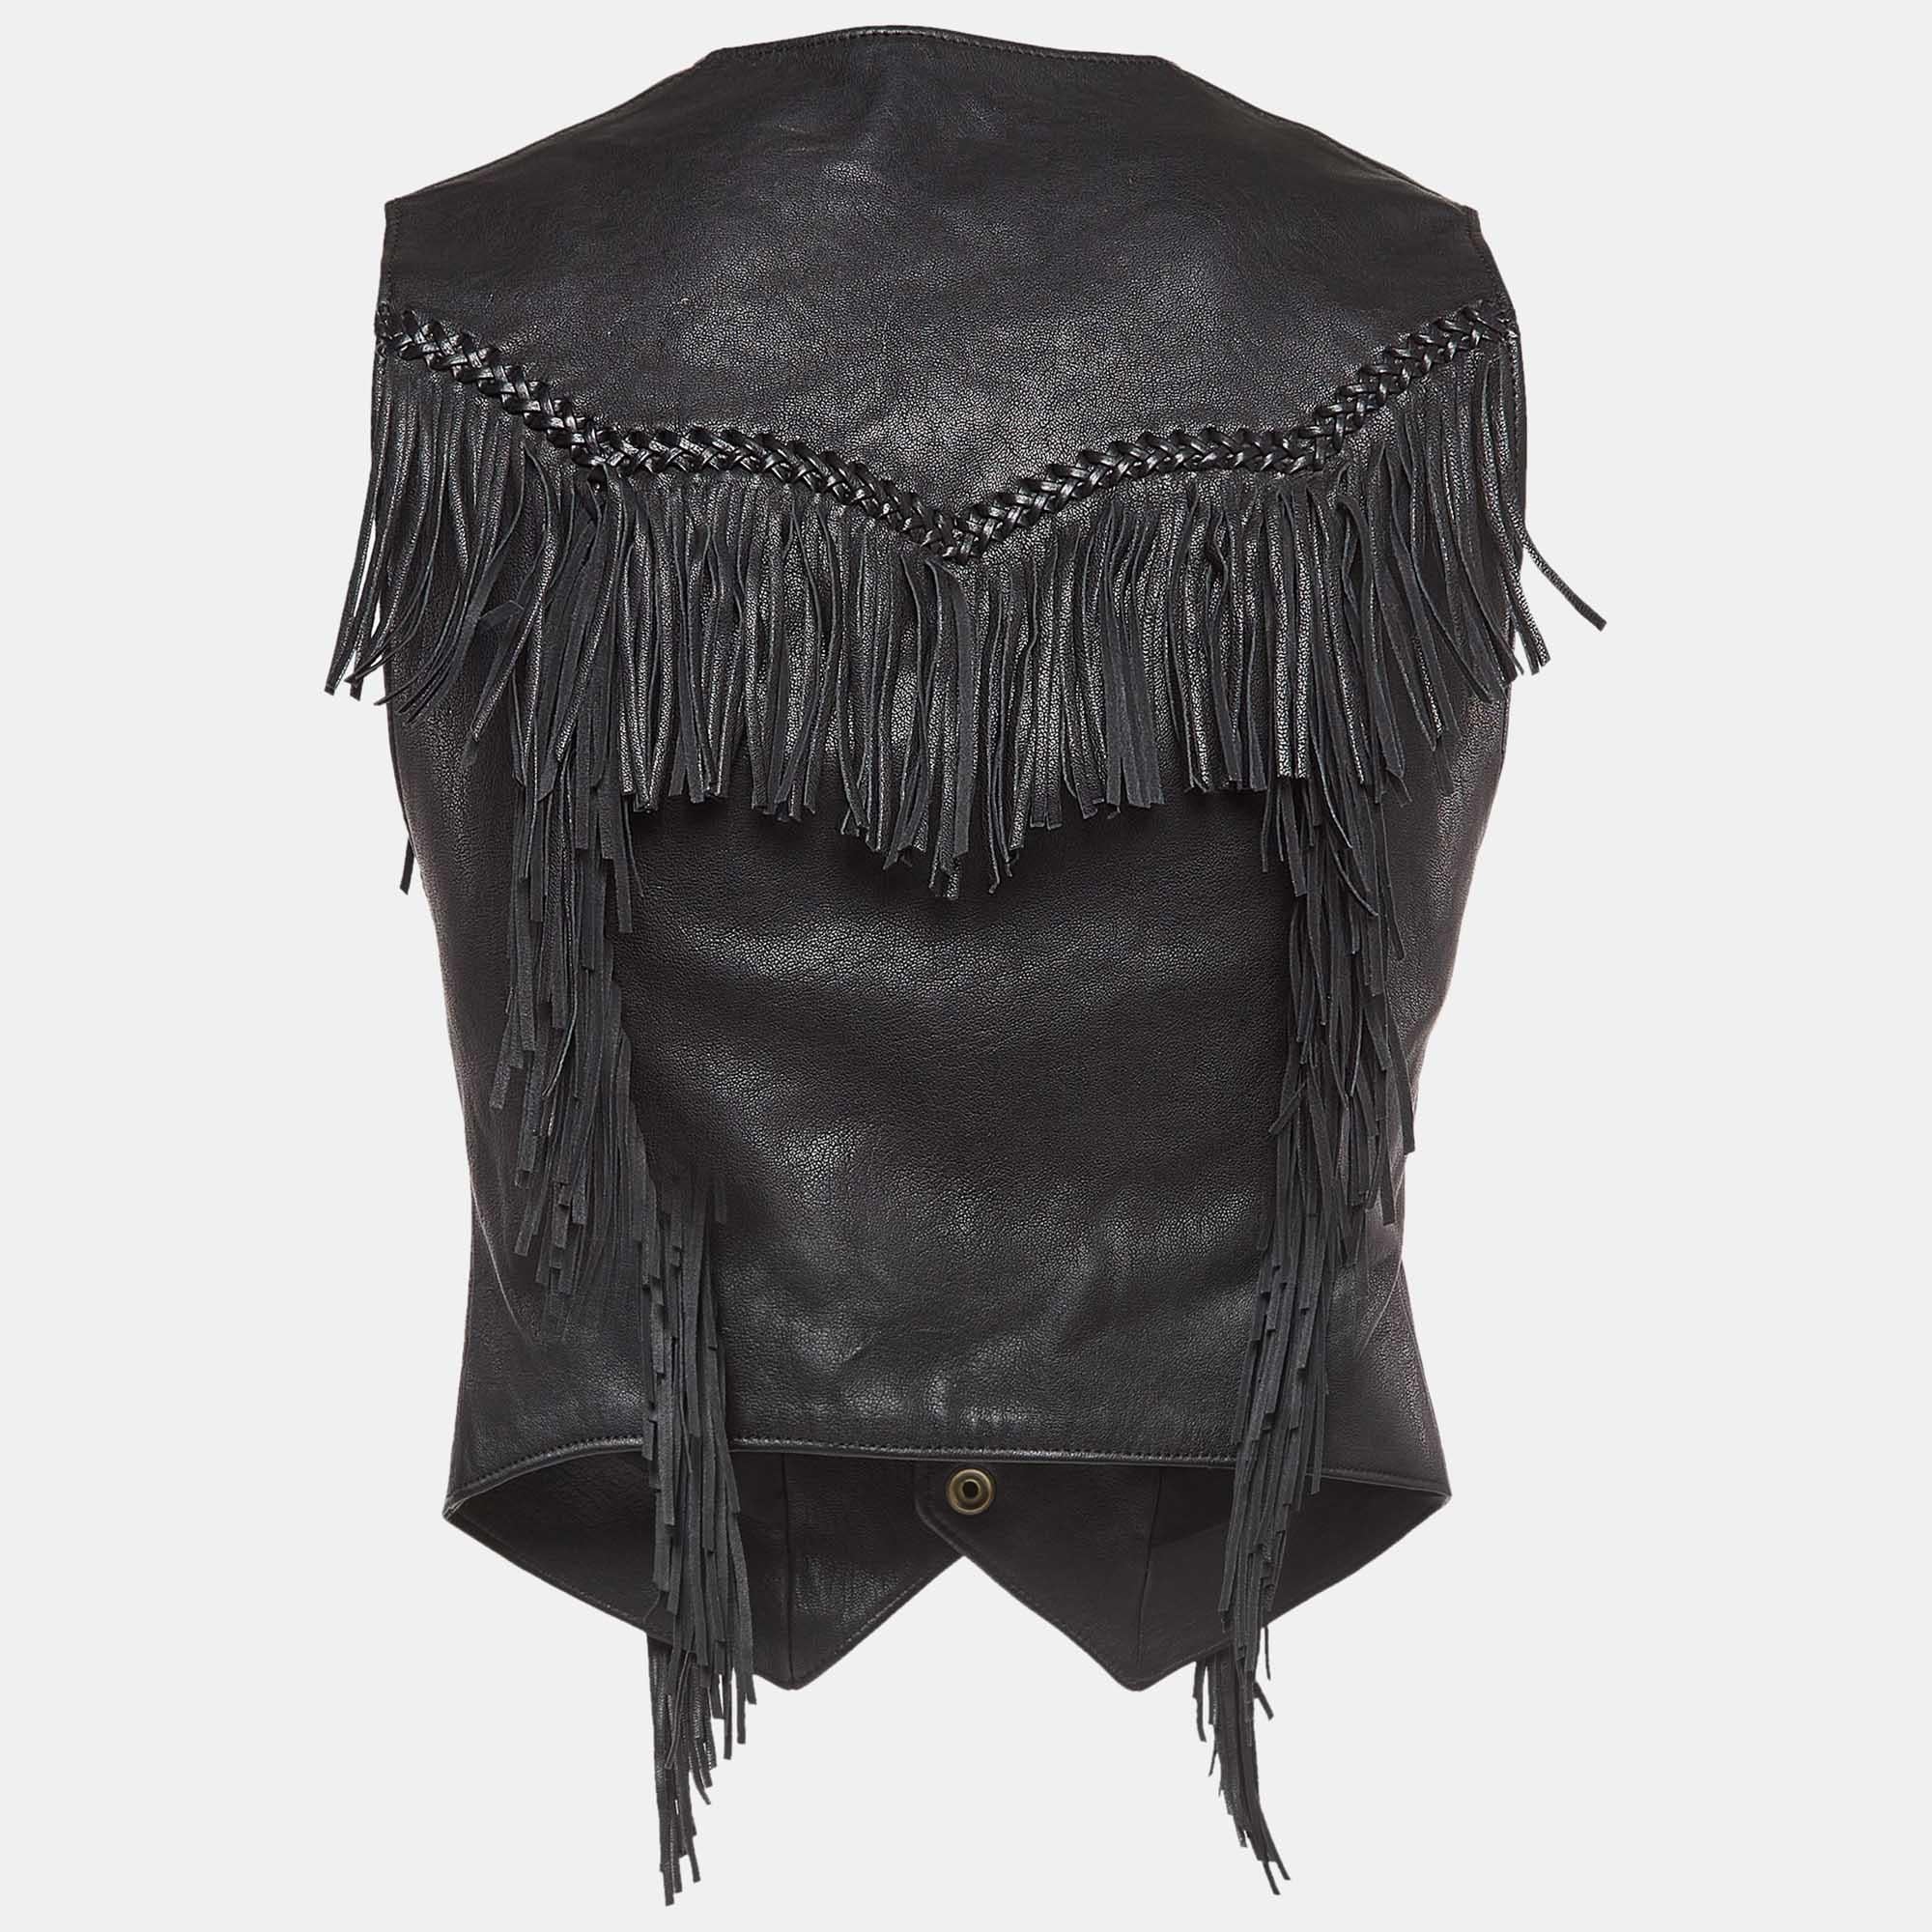 Crafted by Saint Laurent, this striking black leather vest exudes a fusion of rugged charm and urban chic. Adorned with intricate fringe detailing, it channels a rebellious spirit with a touch of refinement. Perfect for adding a dash of edgy